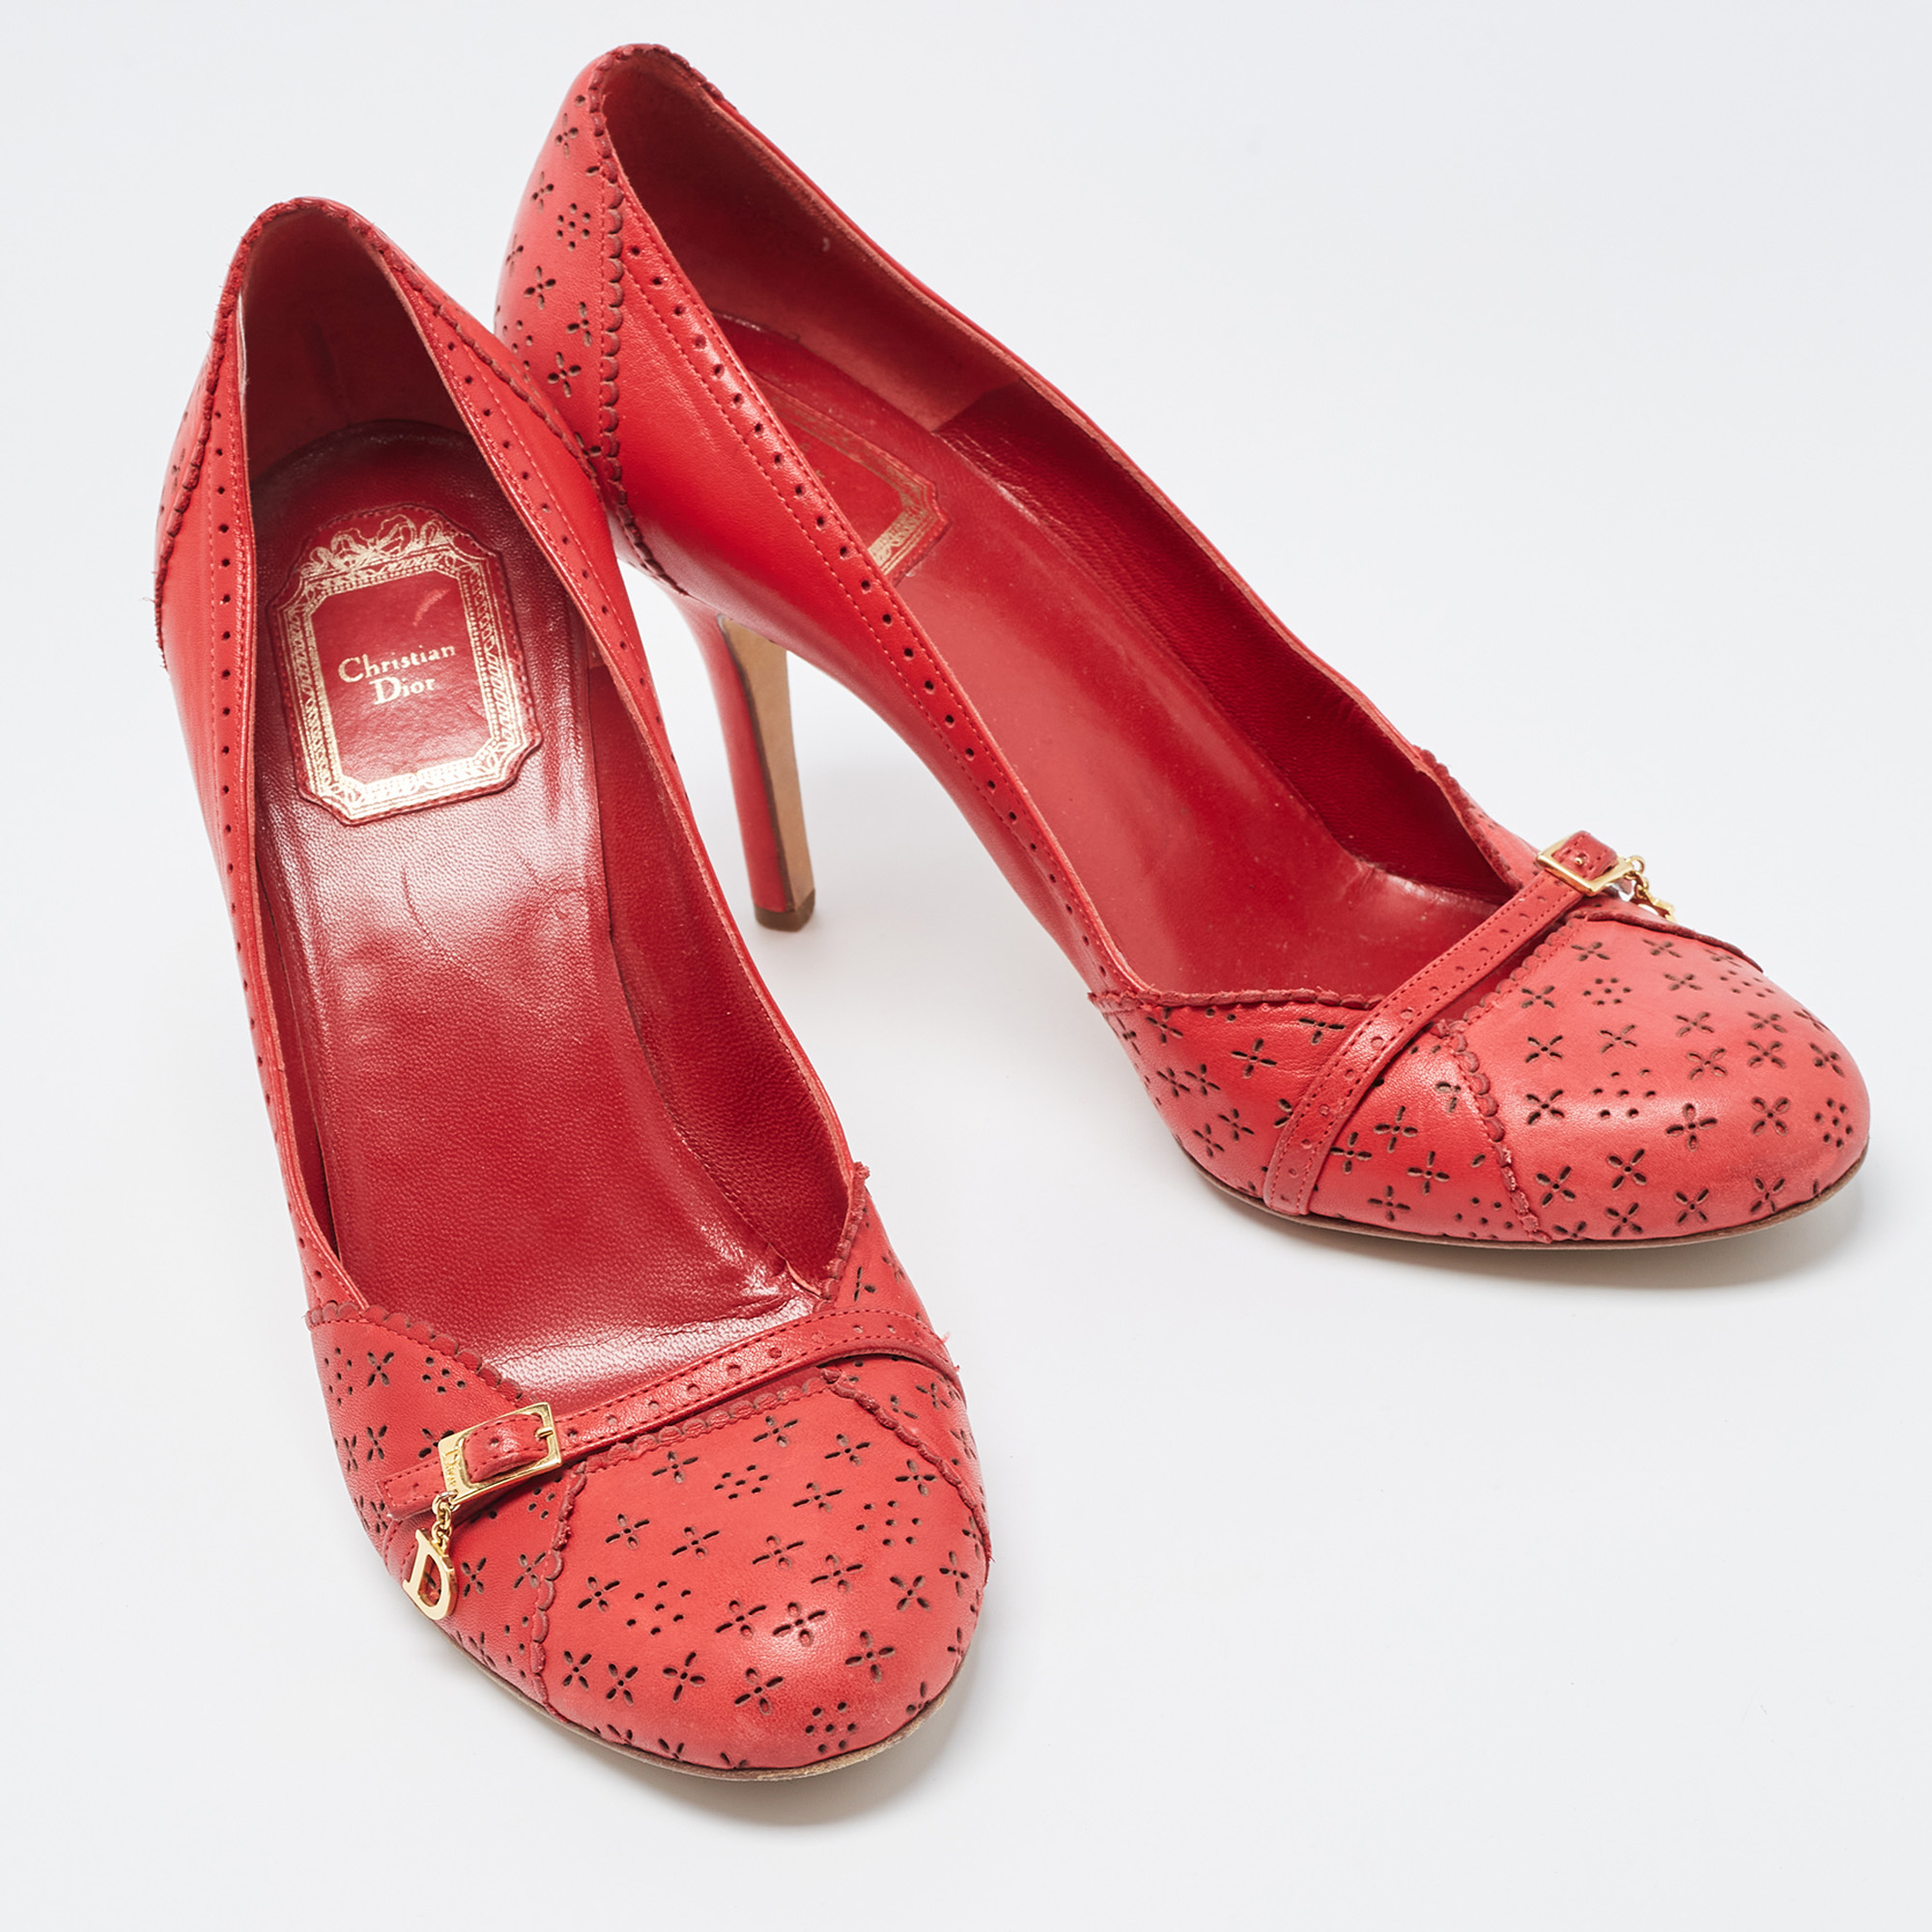 Dior Red Leather Round Toe Pumps Size 39